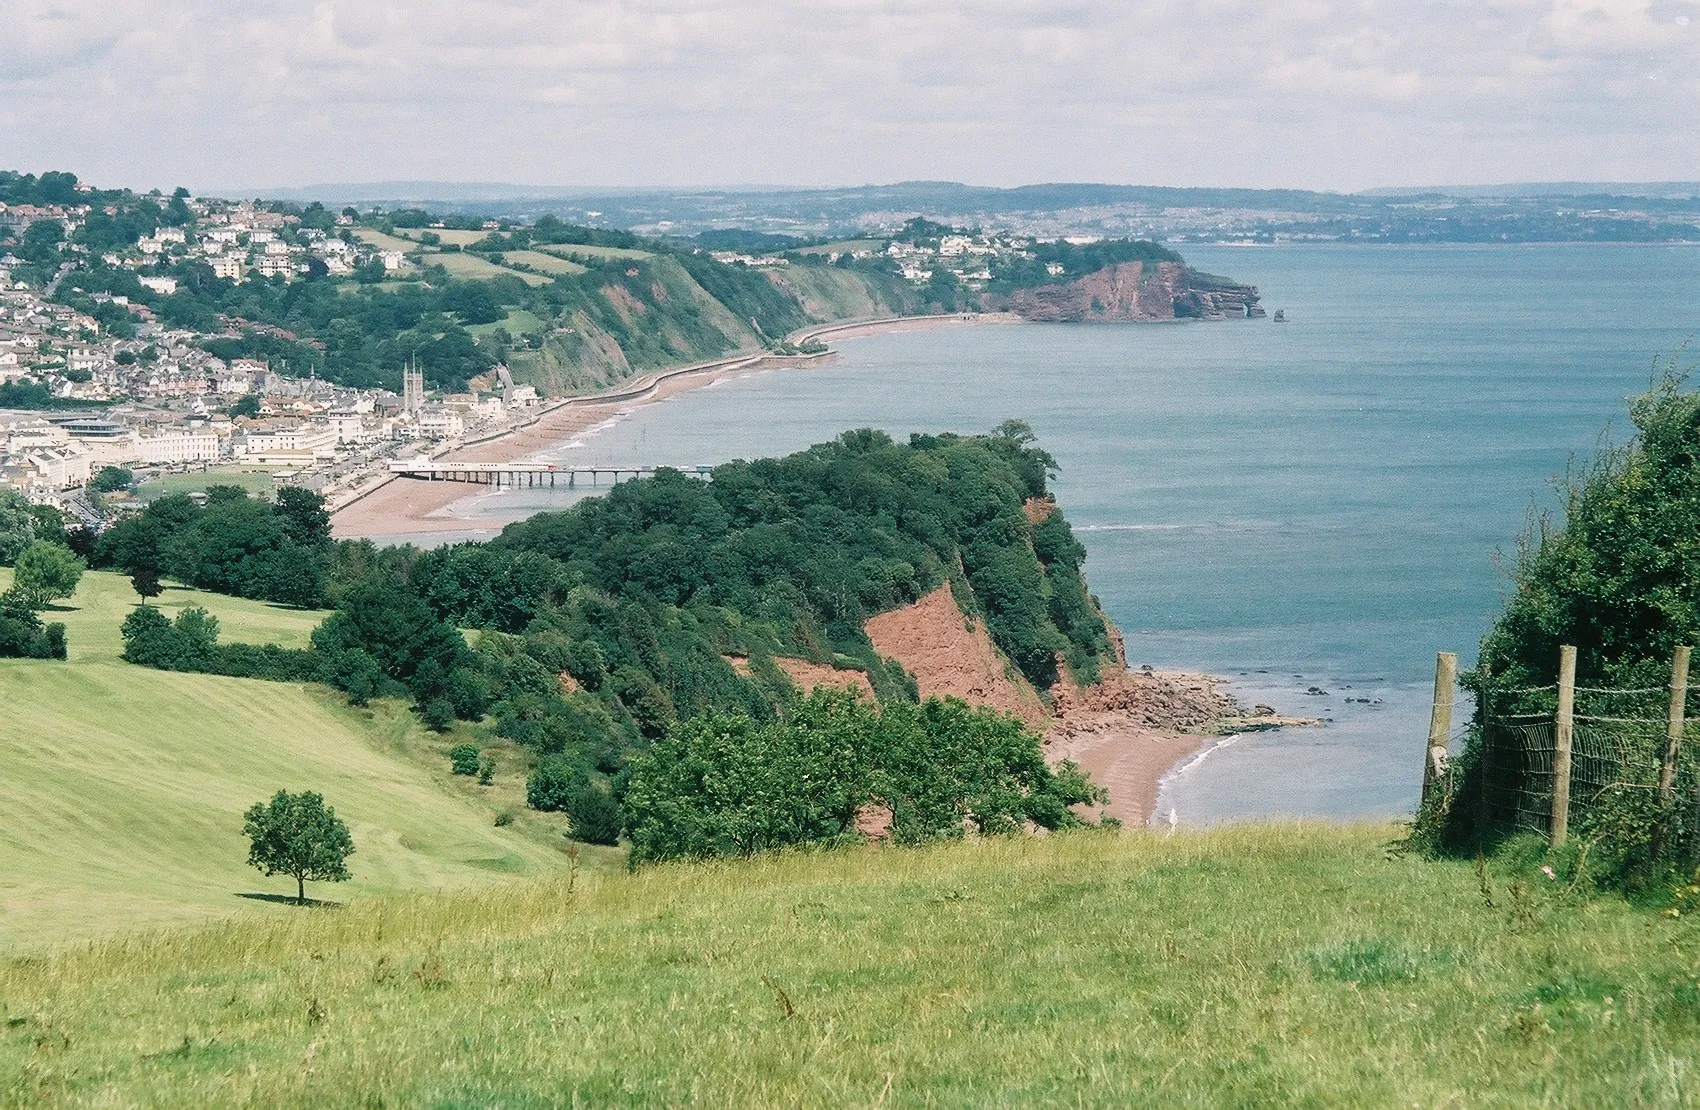 Photo showing: Estuary of Teignmouth seen from above Shaldon across the Ness